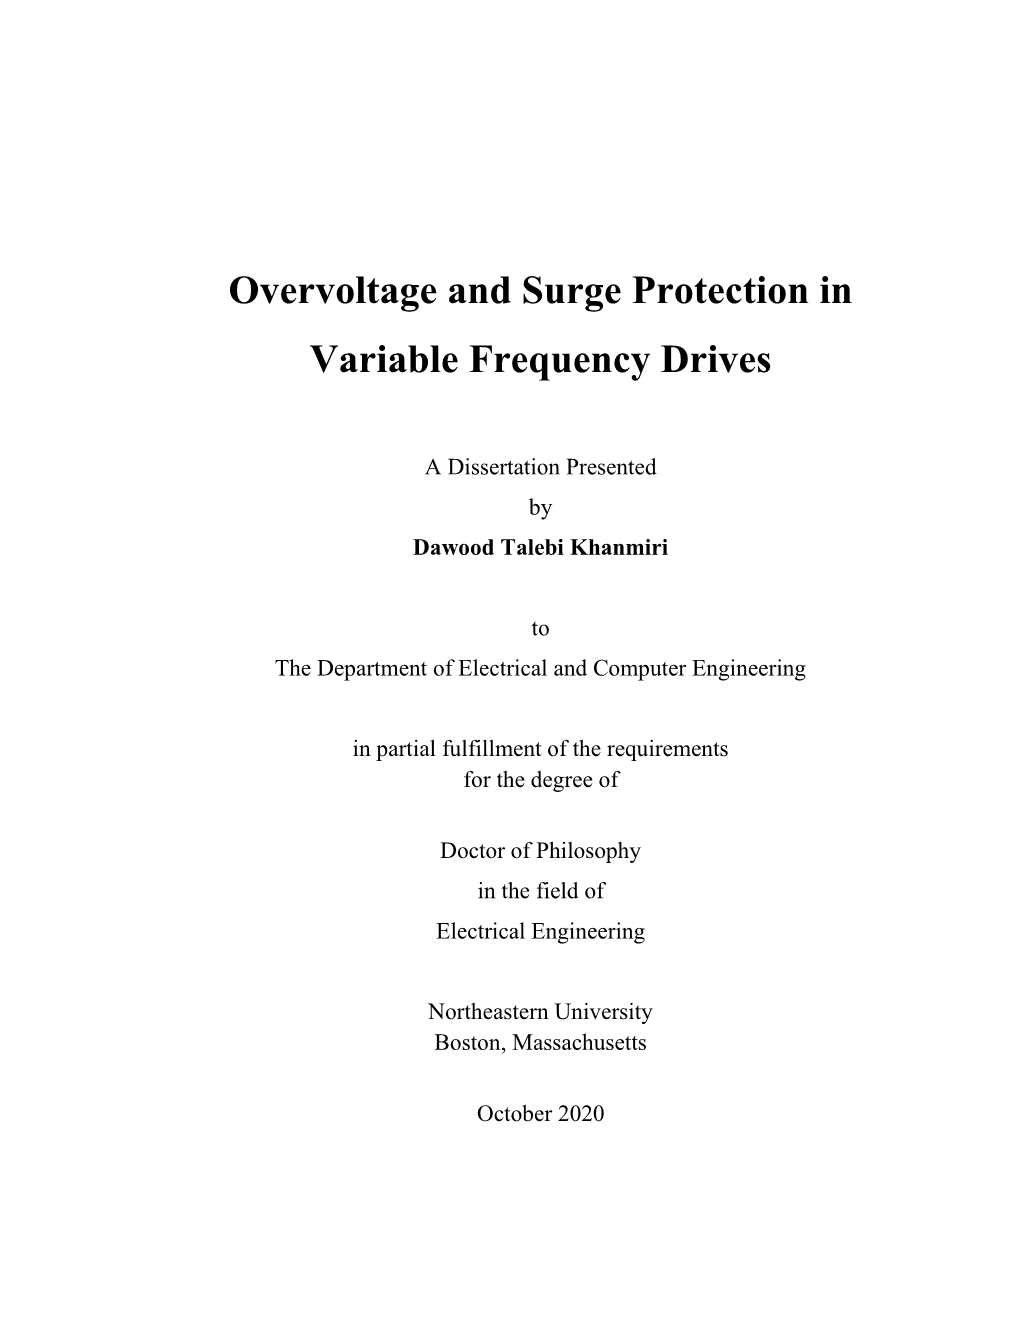 Overvoltage and Surge Protection in Variable Frequency Drives